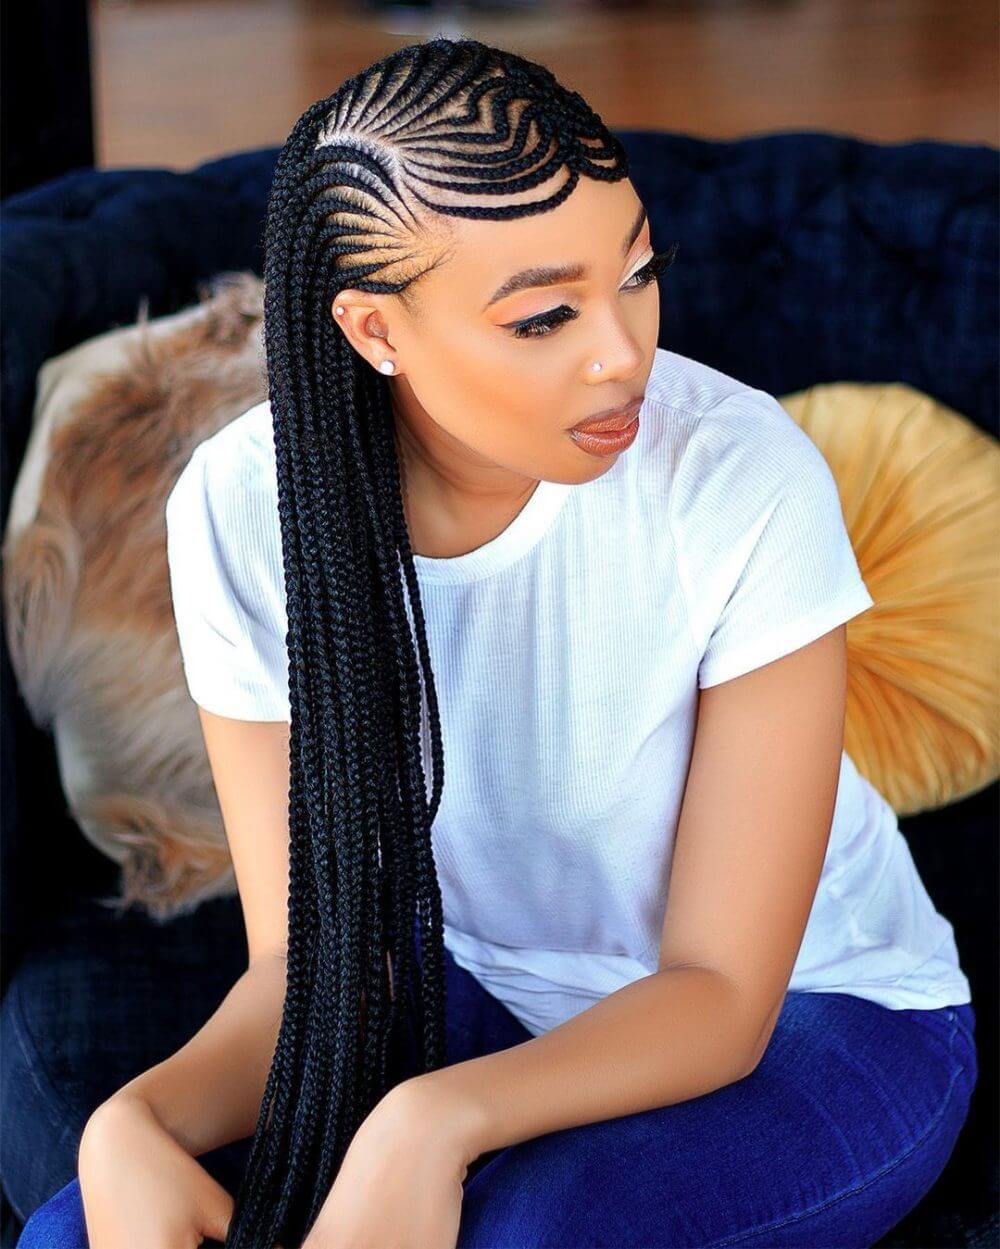 50 Trendy Braided Hairstyles To Instantly Glam Up Your Look - 337